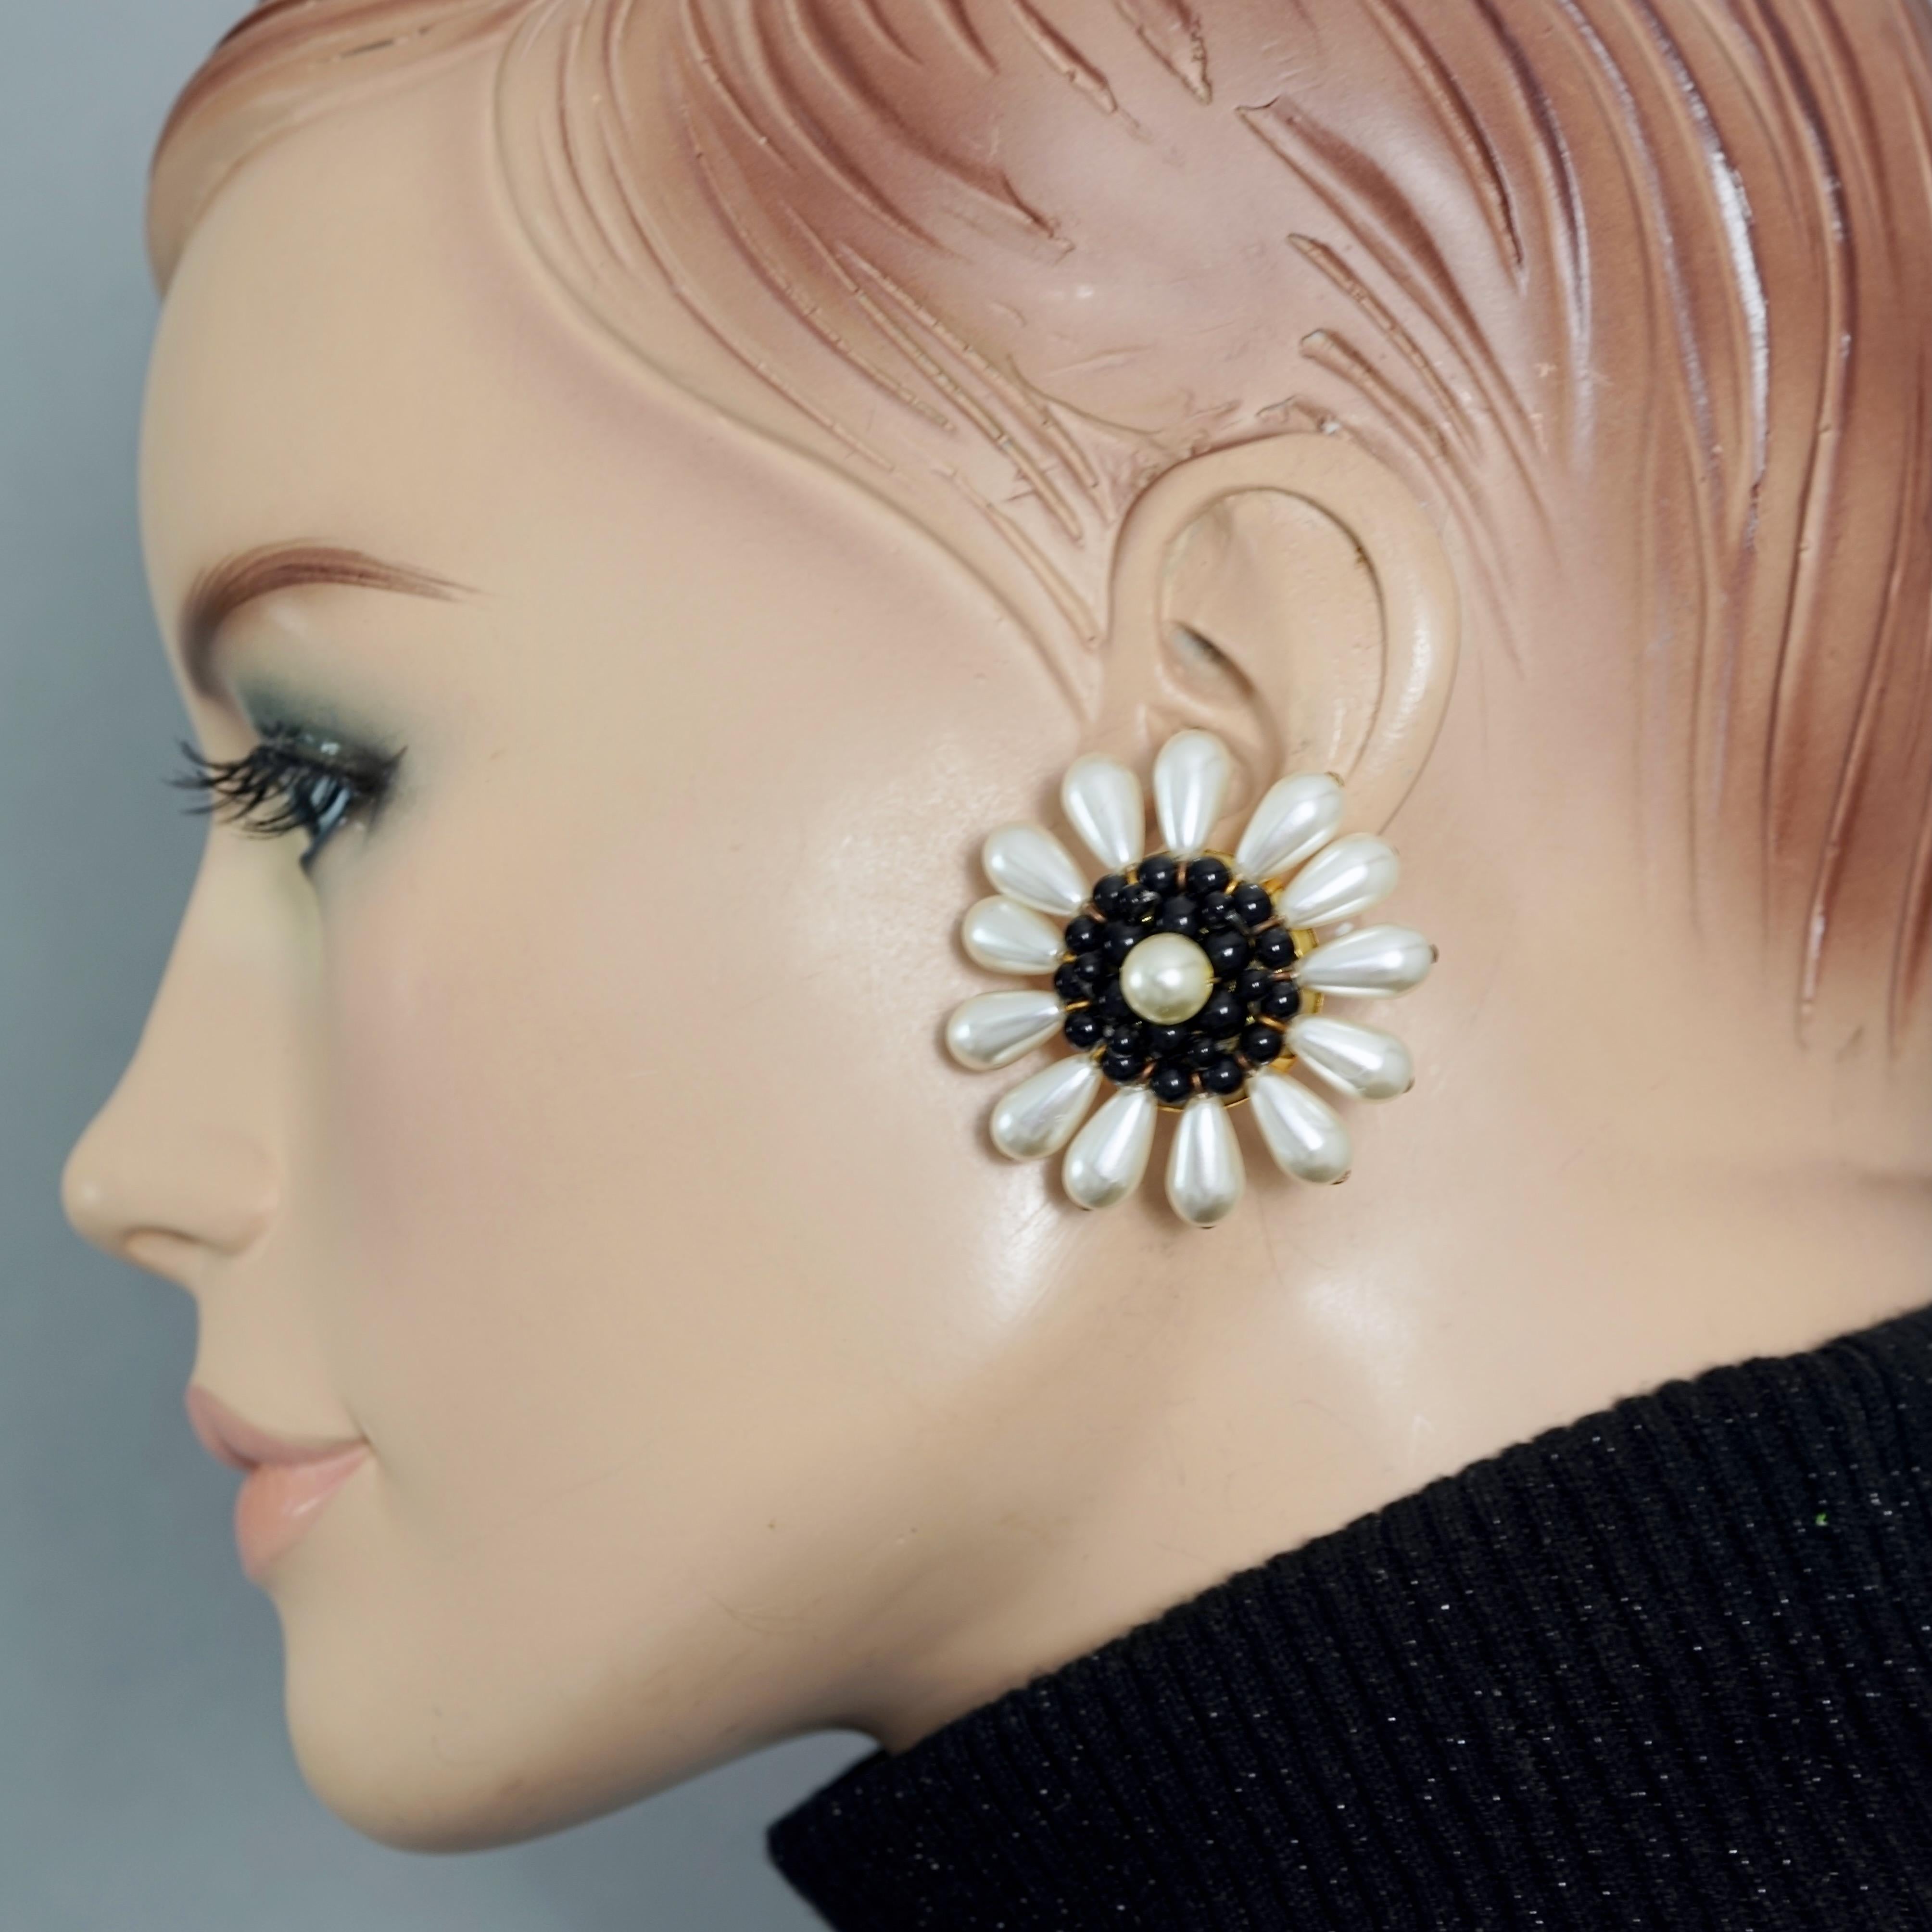 Vintage Massive LOUIS FERAUD Flower Pearl Earrings

Measurements:
Height: 1.73 inches (4.4 cm)
Width: 1.73 inches (4.4 cm)
Weight per Earring: 11 grams

Features:
- 100% Authentic LOUIS FERAUD.
- Massive flower earrings with pearls and glass